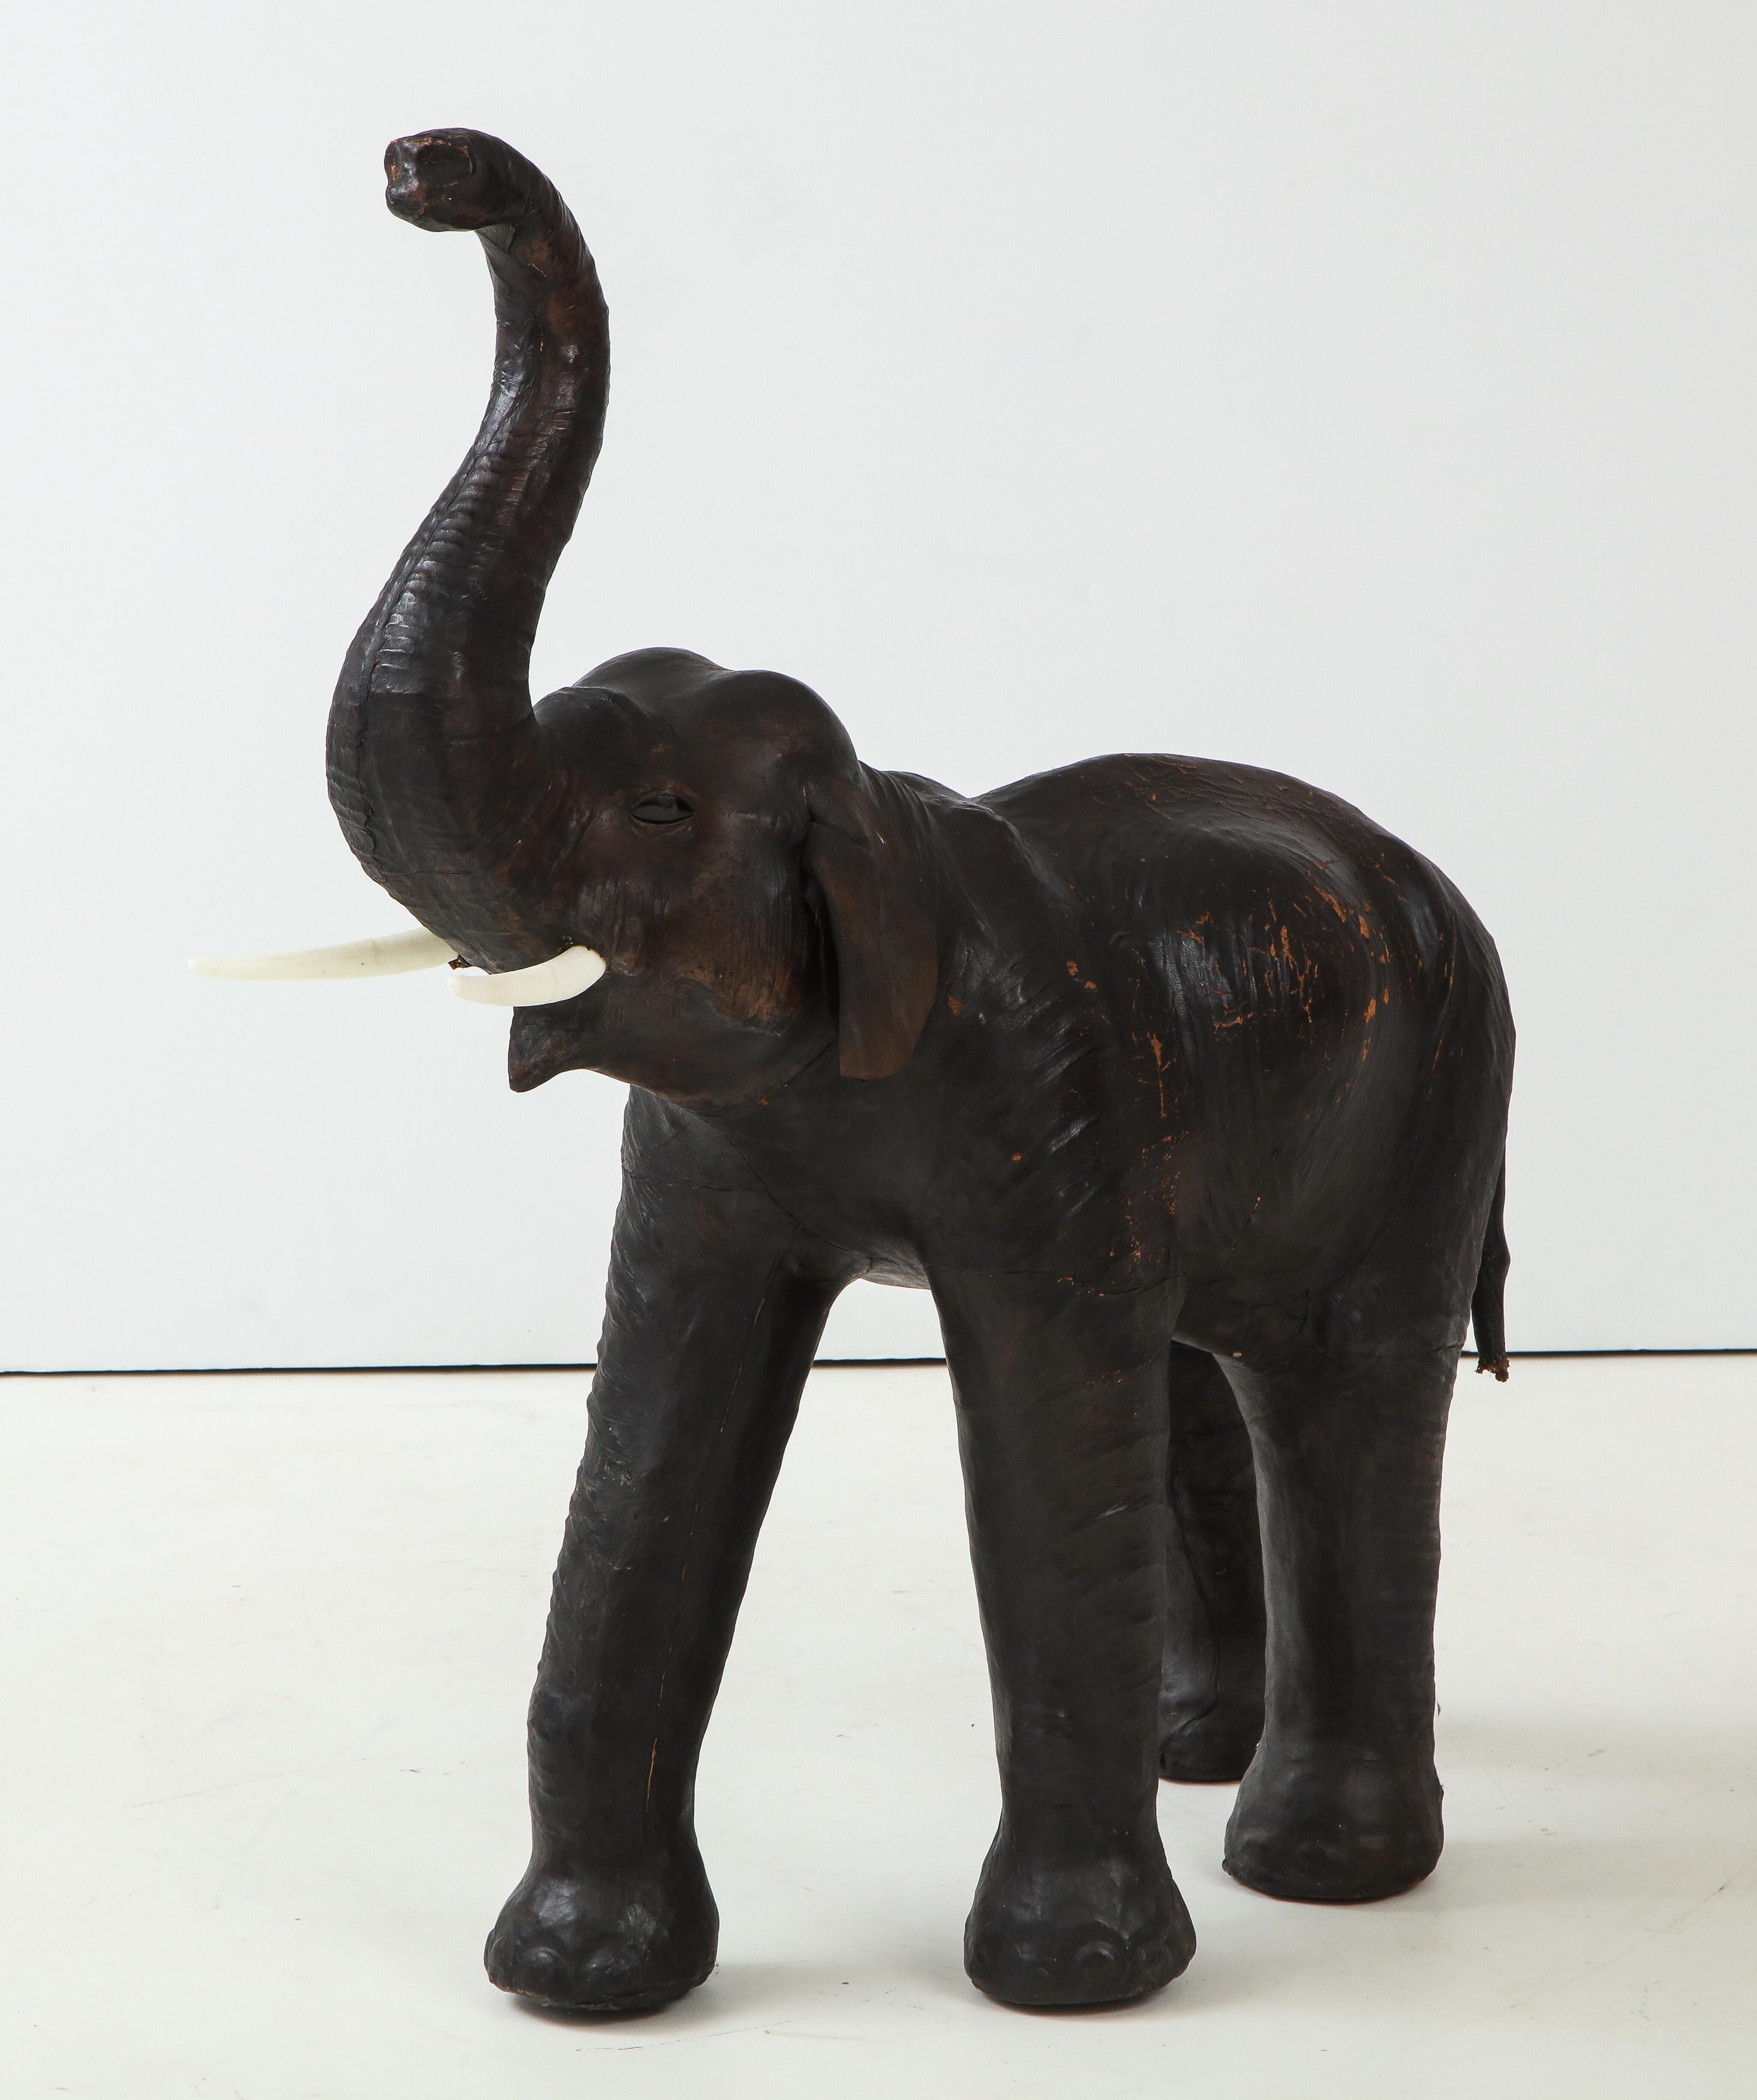 Handcrafted leather elephant statue with glass eyes and white wooden tusks.